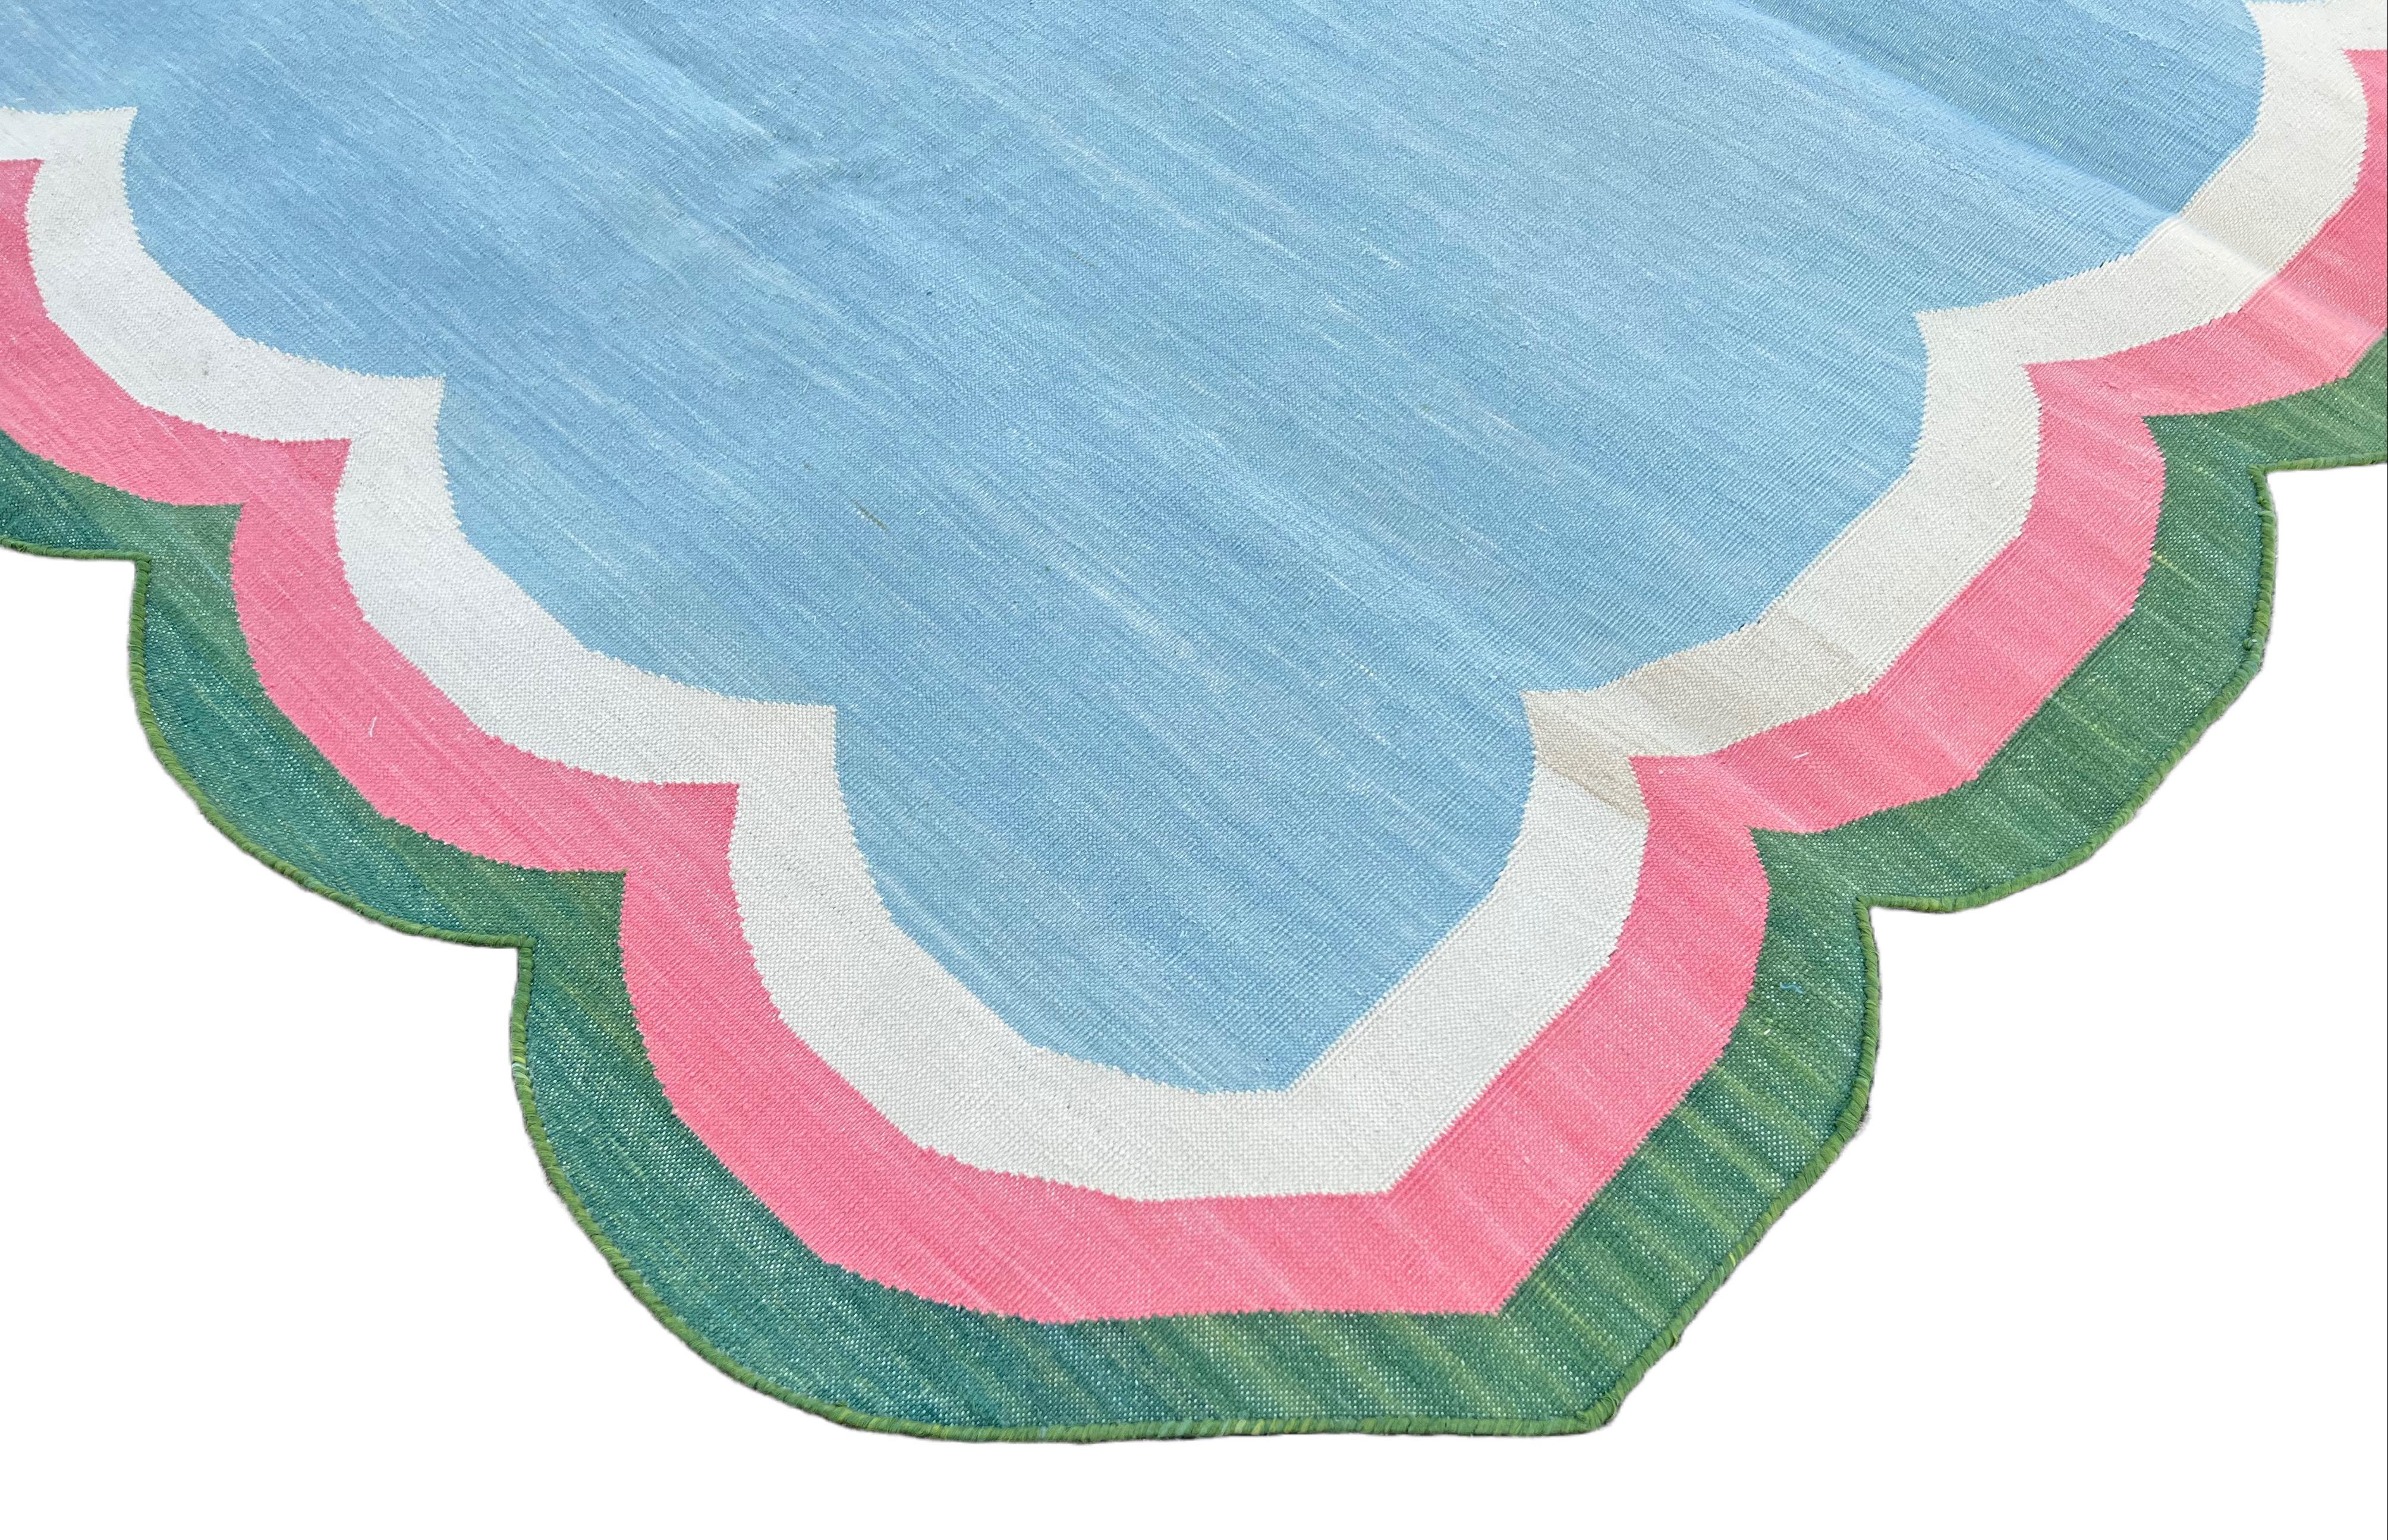 Mid-Century Modern Handmade Cotton Area Flat Weave Rug, Blue, Pink, Green Scalloped Indian Dhurrie For Sale